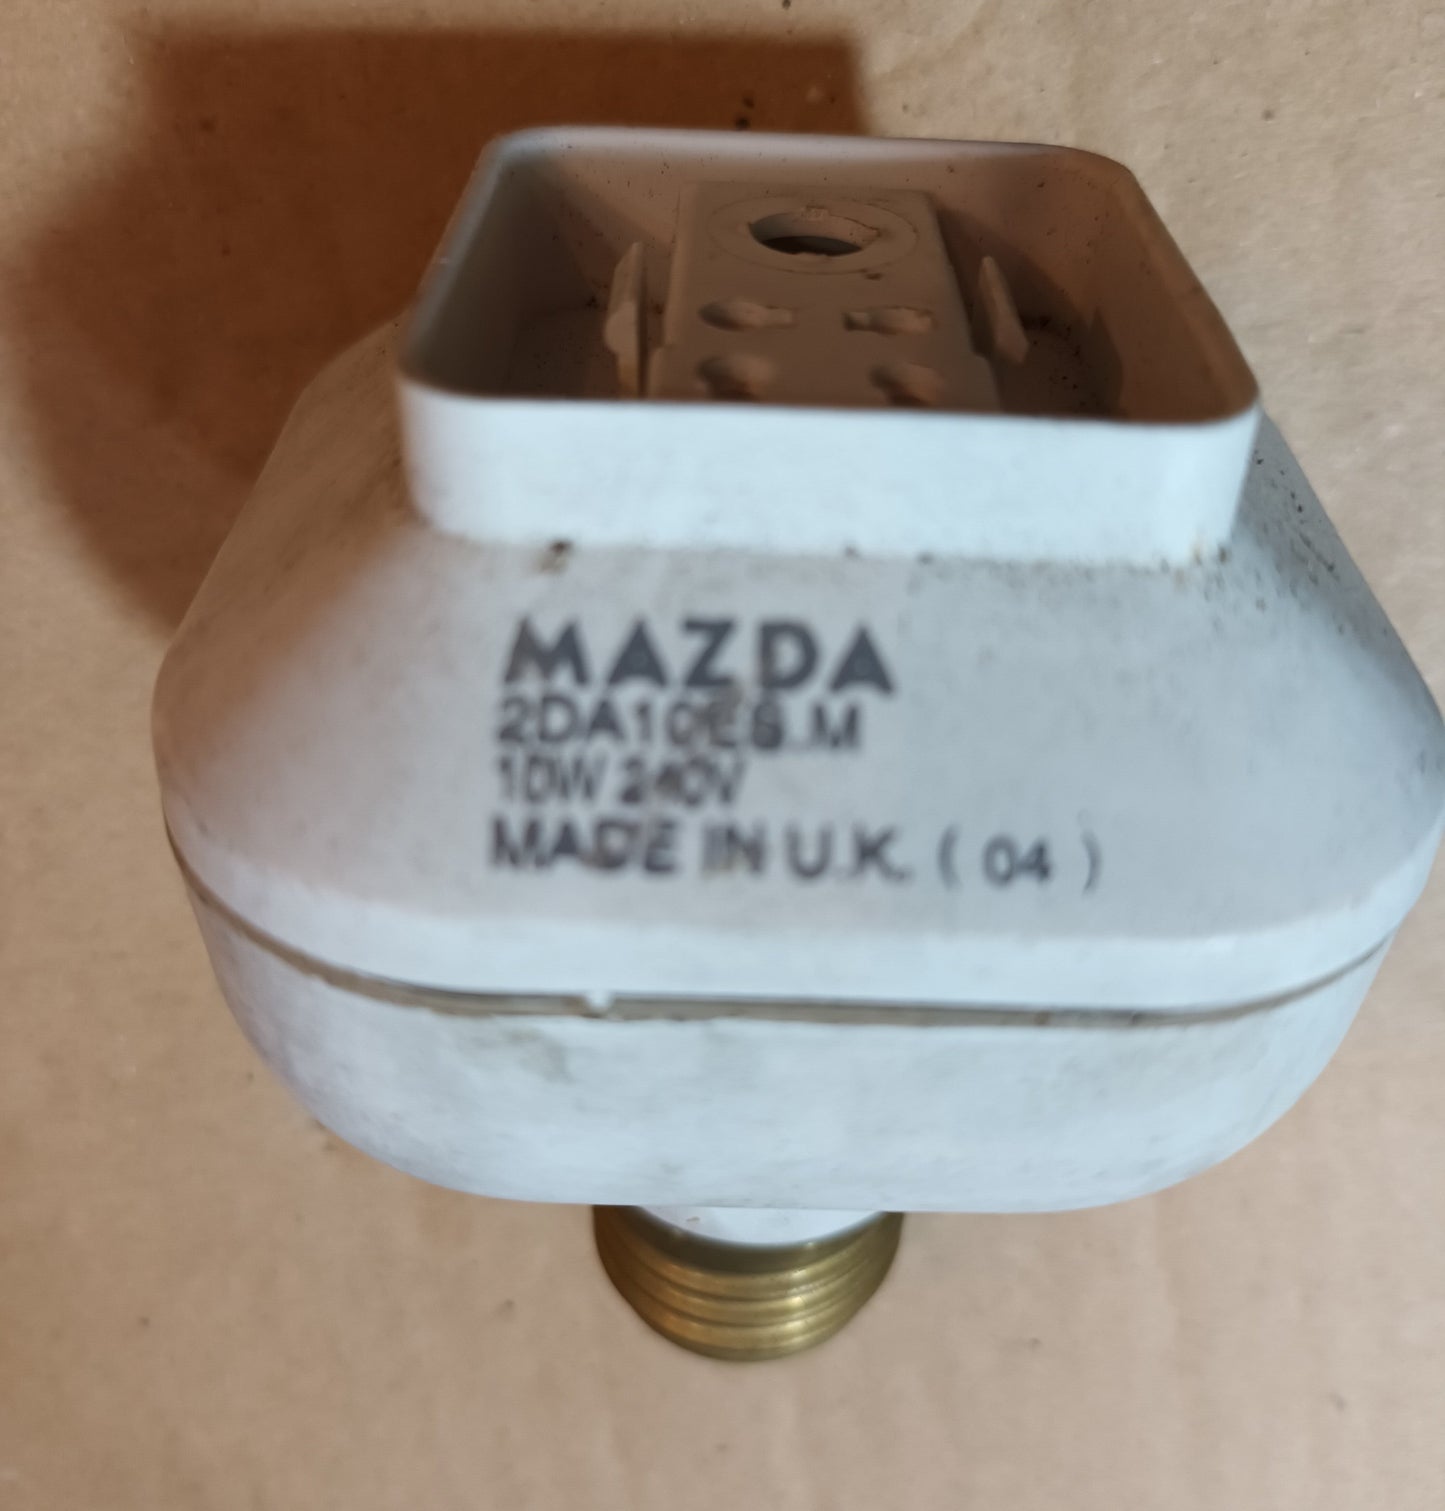 Mazda 2D 4pin 10W bulb adapter ES /E27 made in the UK